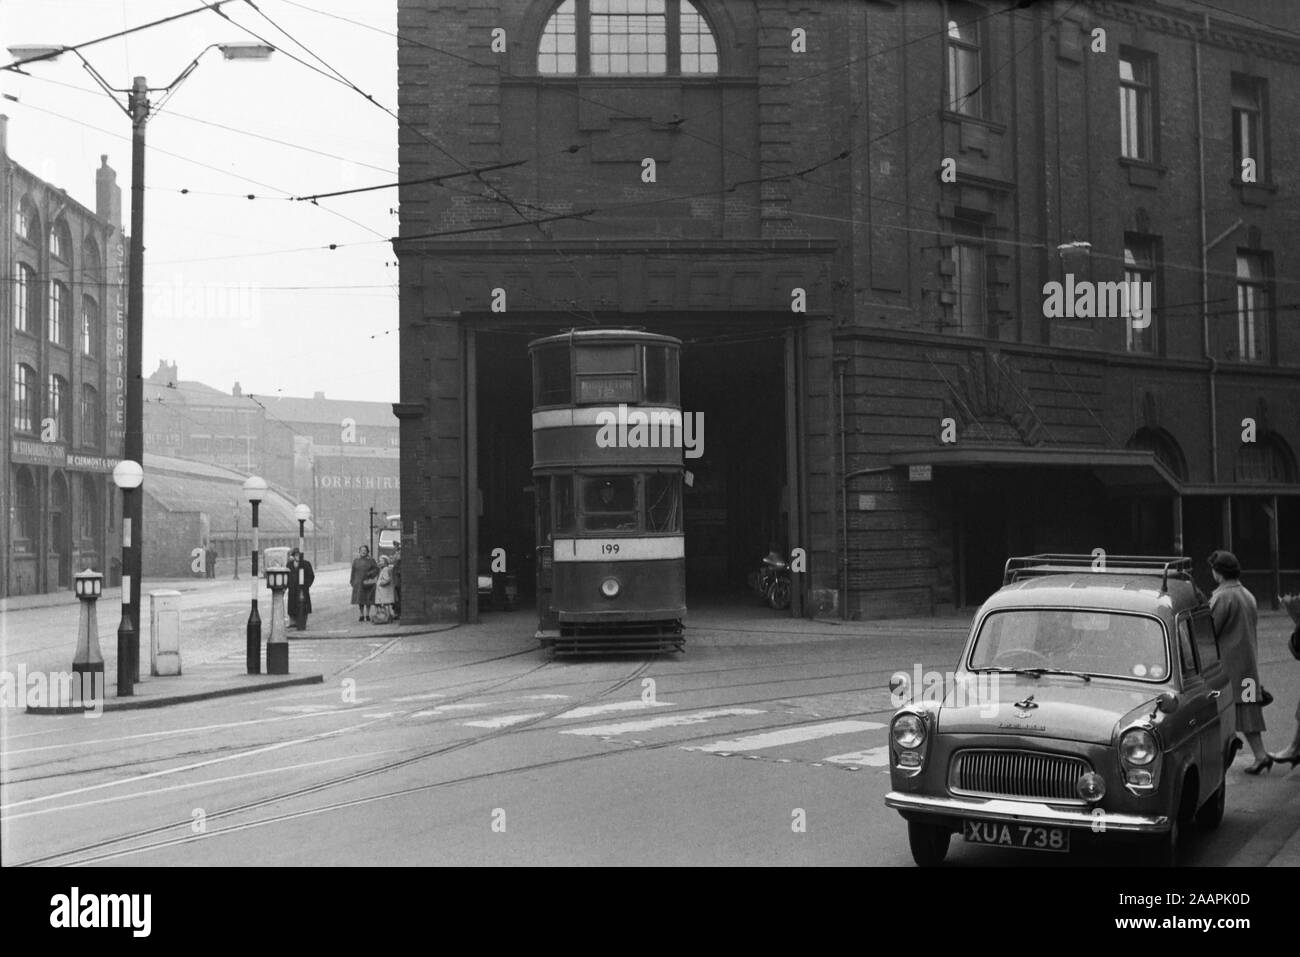 Leeds Tram no 199 at Swinegate Depot with a Thames Trader Van parked outside. Circa 1950s Stock Photo